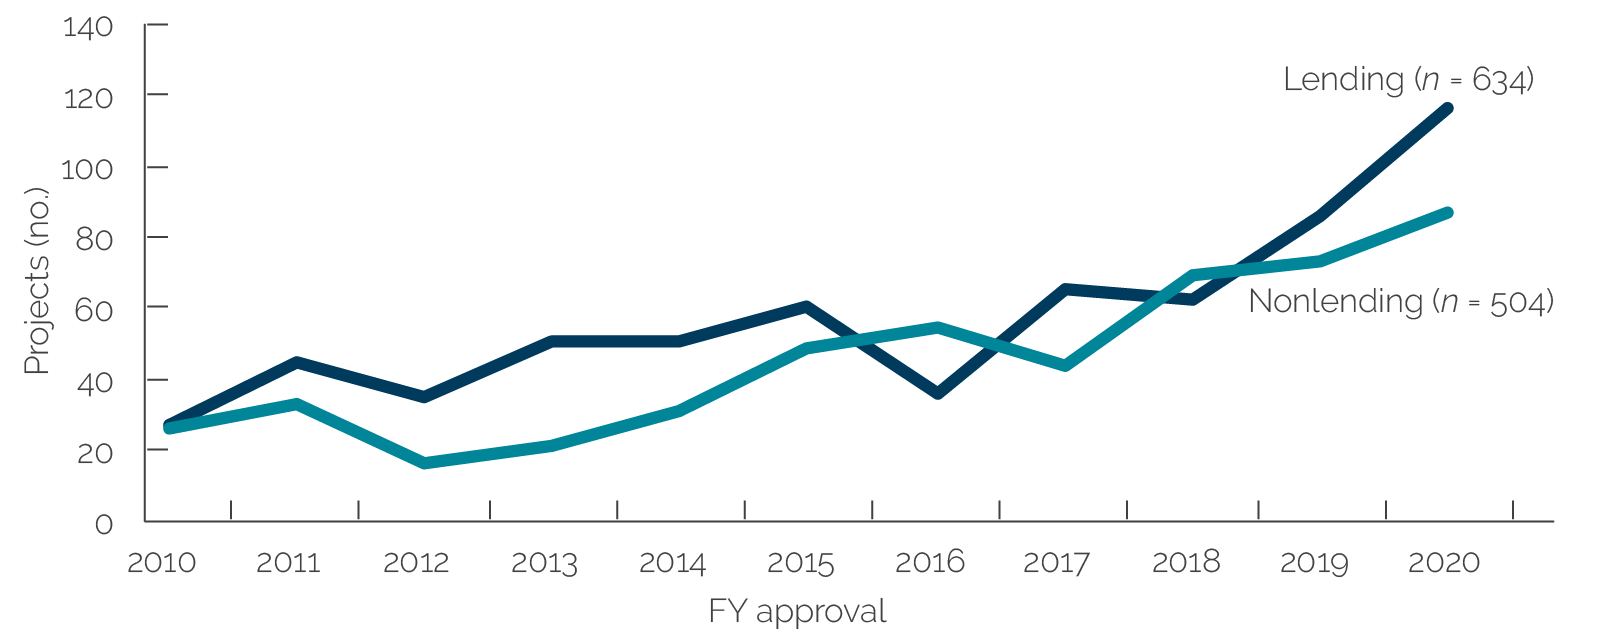 A line graph shows that the number of lending and nonlending projects with D R R has increased from 2010 to 2020.